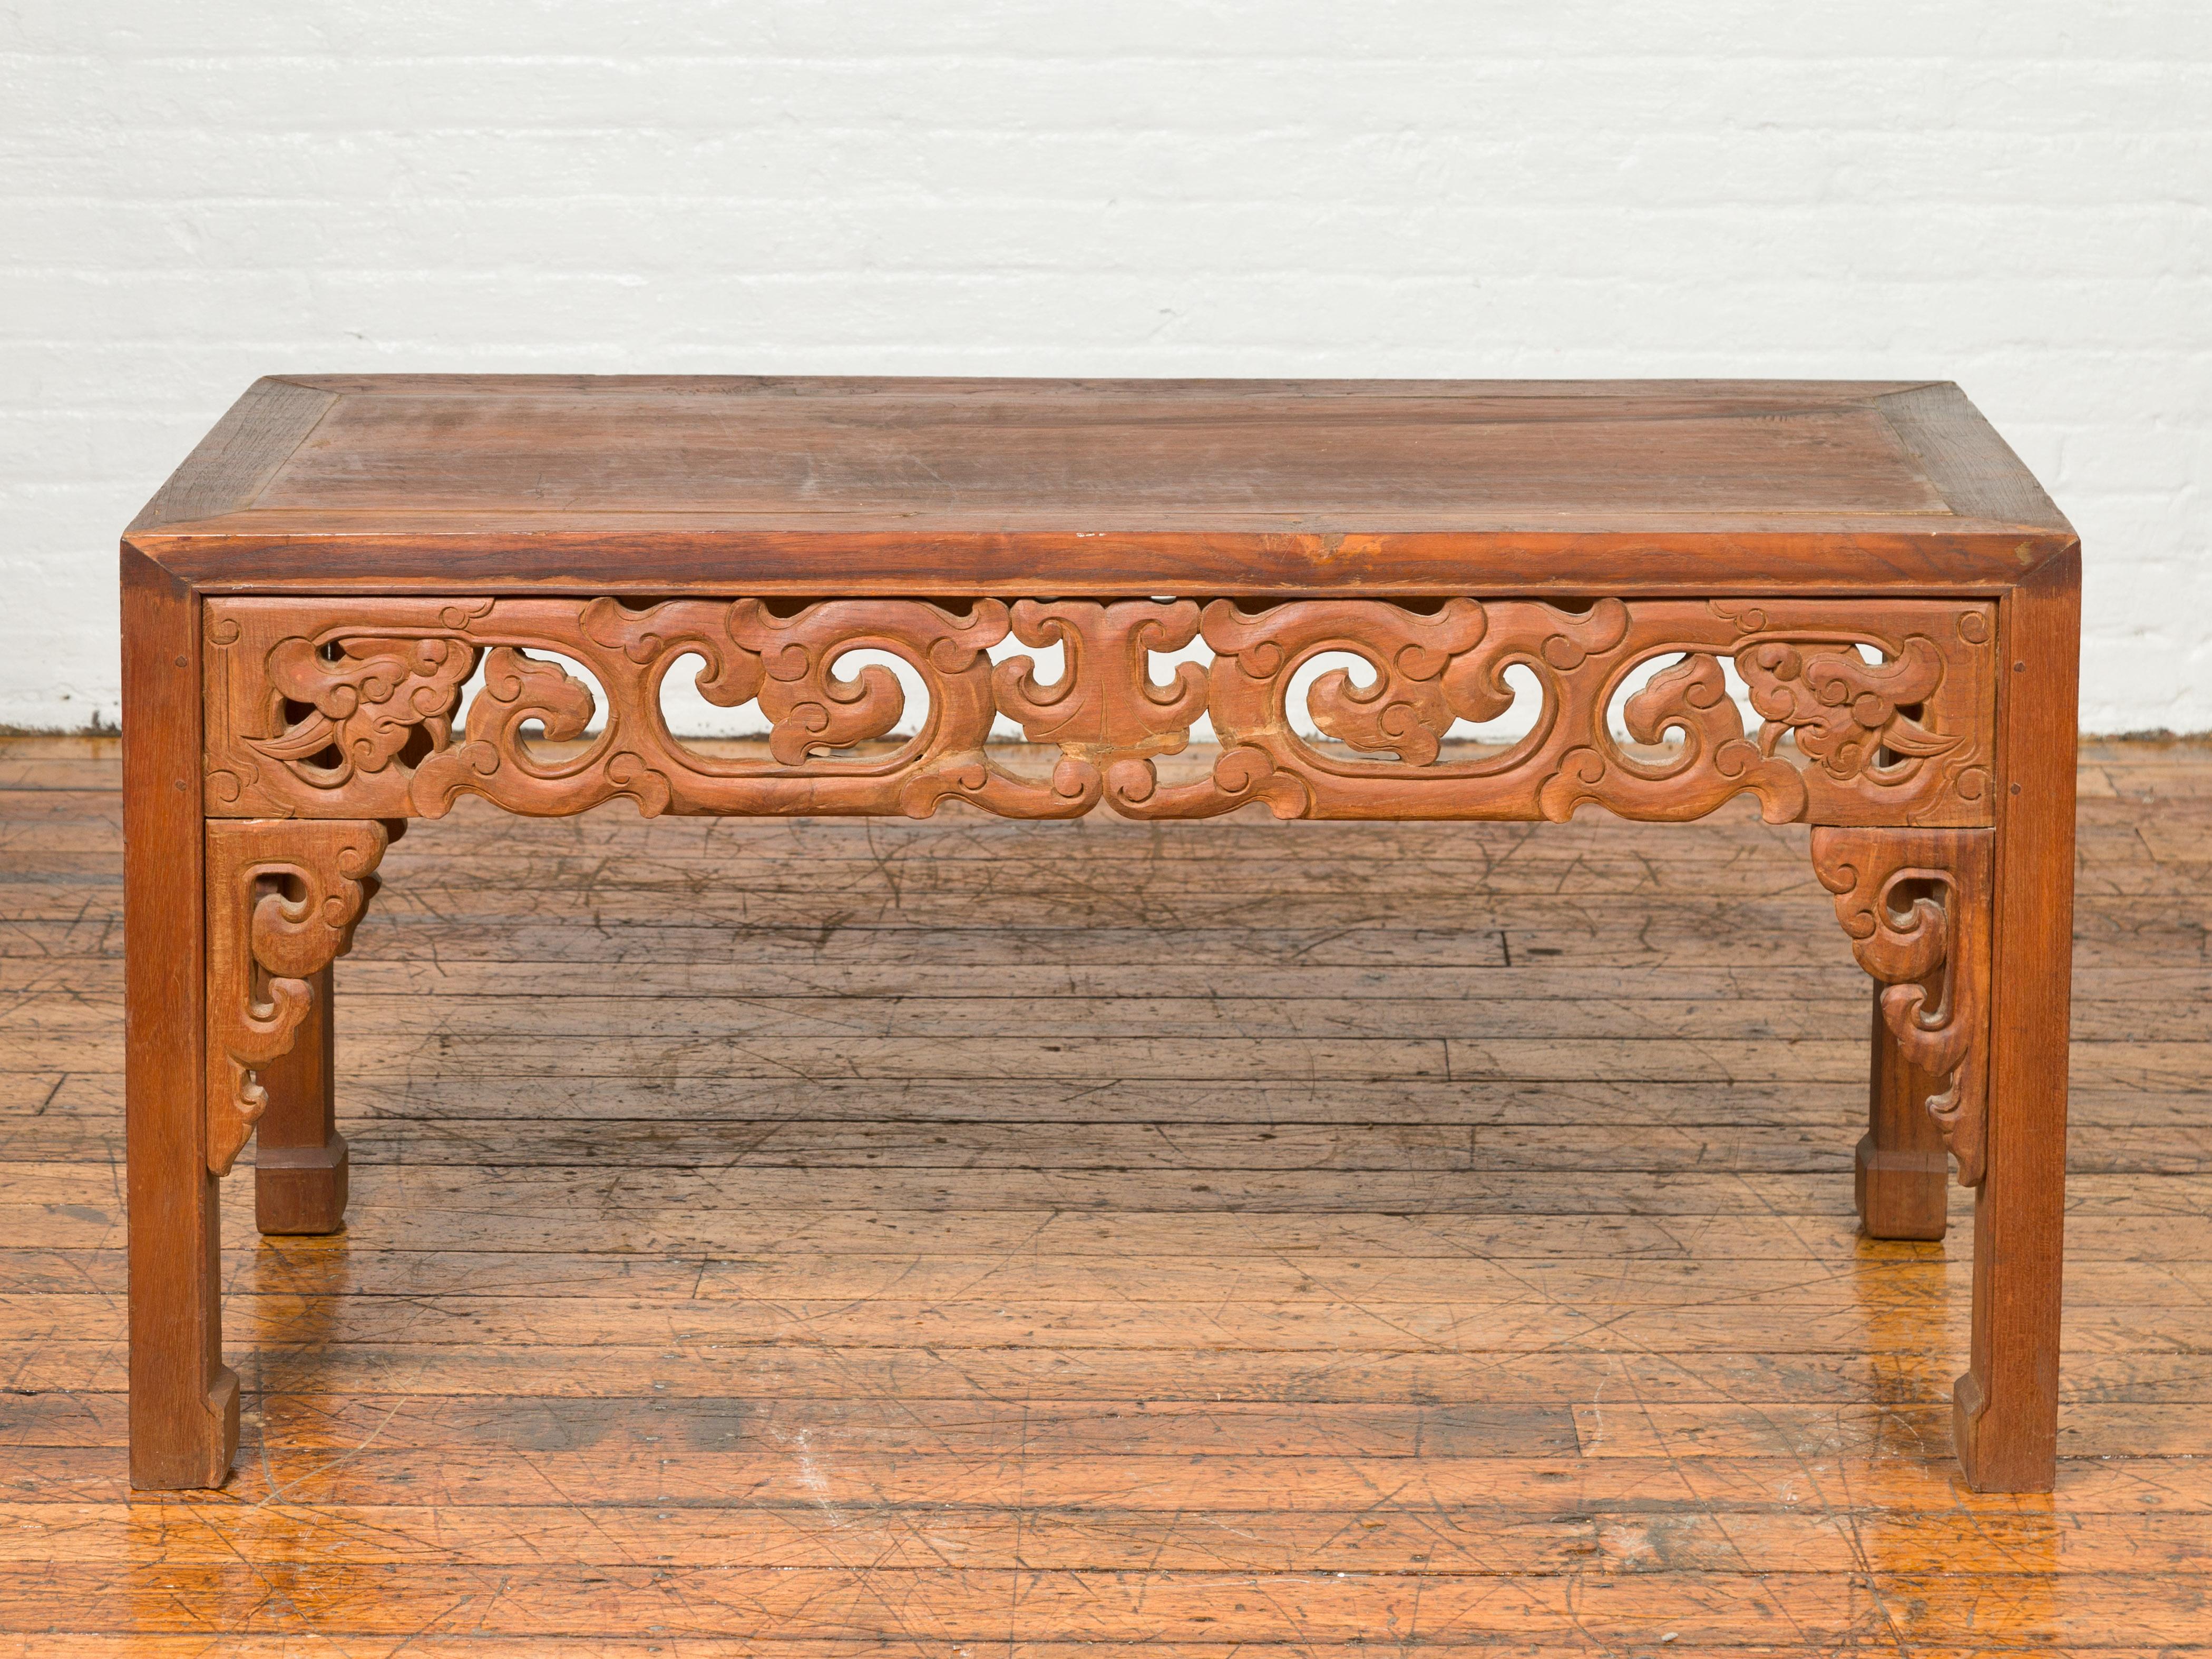 An antique Thai teak side table from the early 20th century, with carved apron and horse hoof extremities. Charming our eyes with its clean lines and handsome apron carved with scrolling cloud motifs, this side table features a rectangular top and